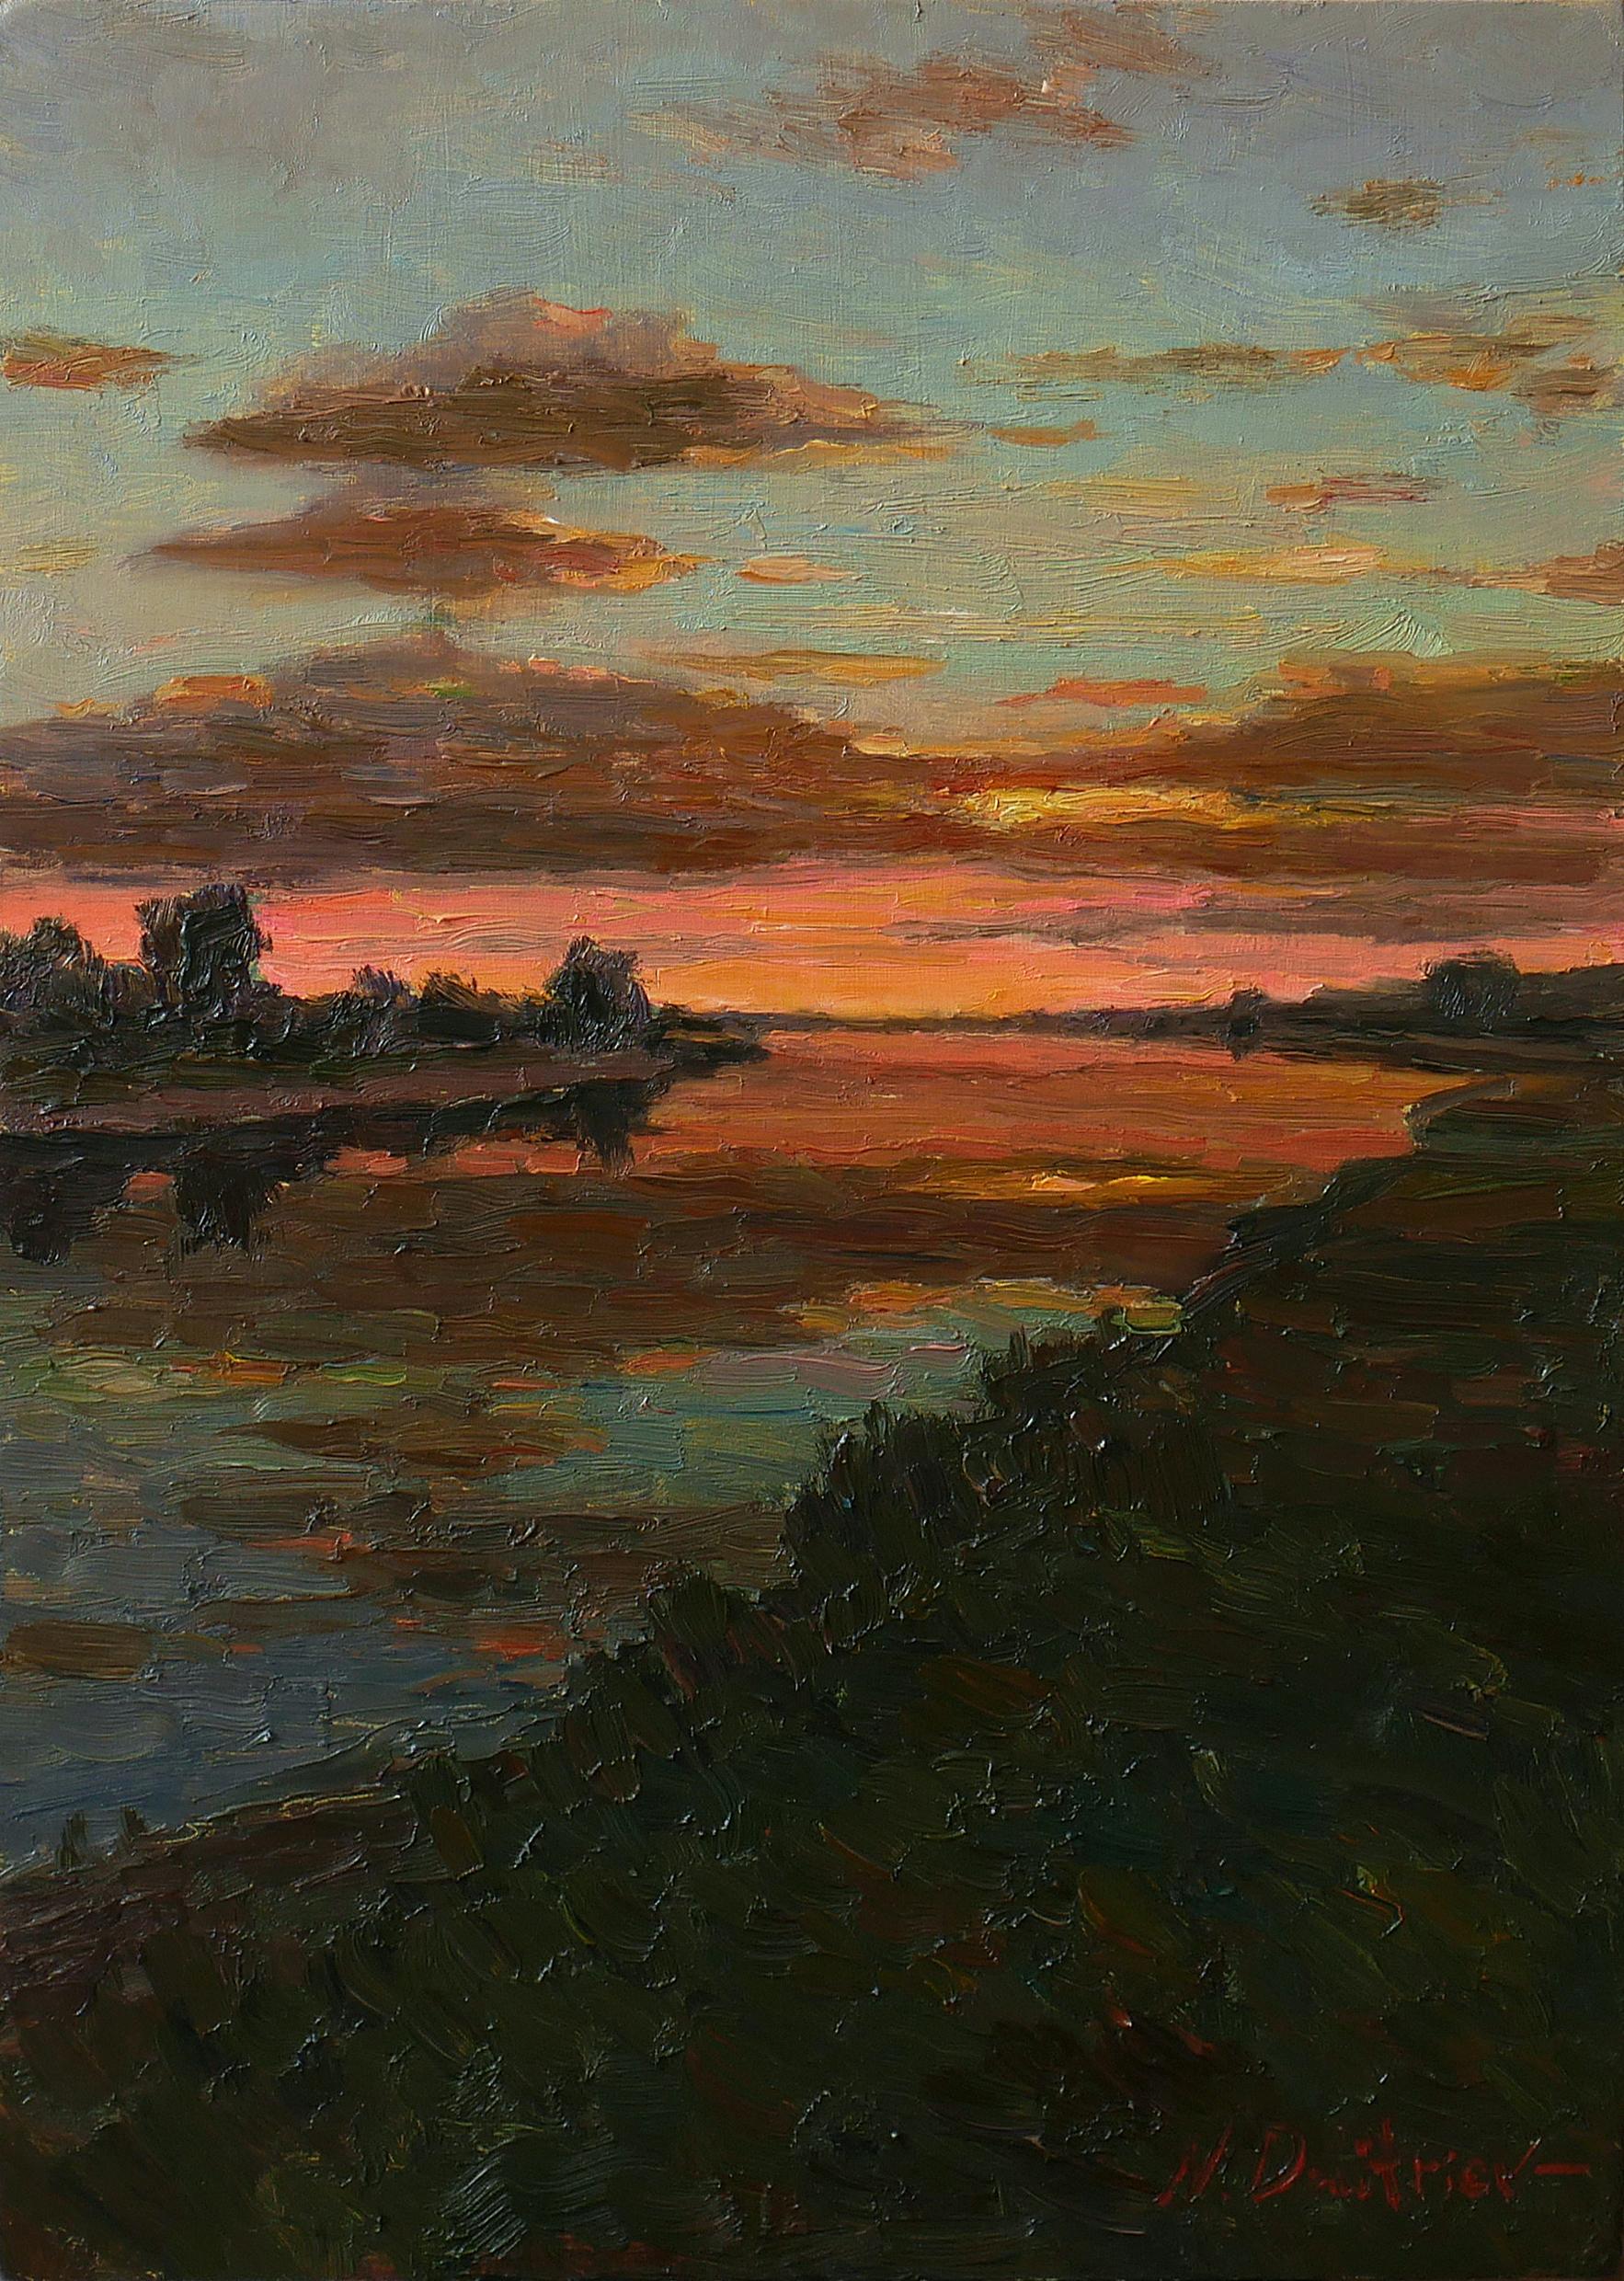 Nikolay Dmitriev Interior Painting - Sunset over the river - sunset landscape painting